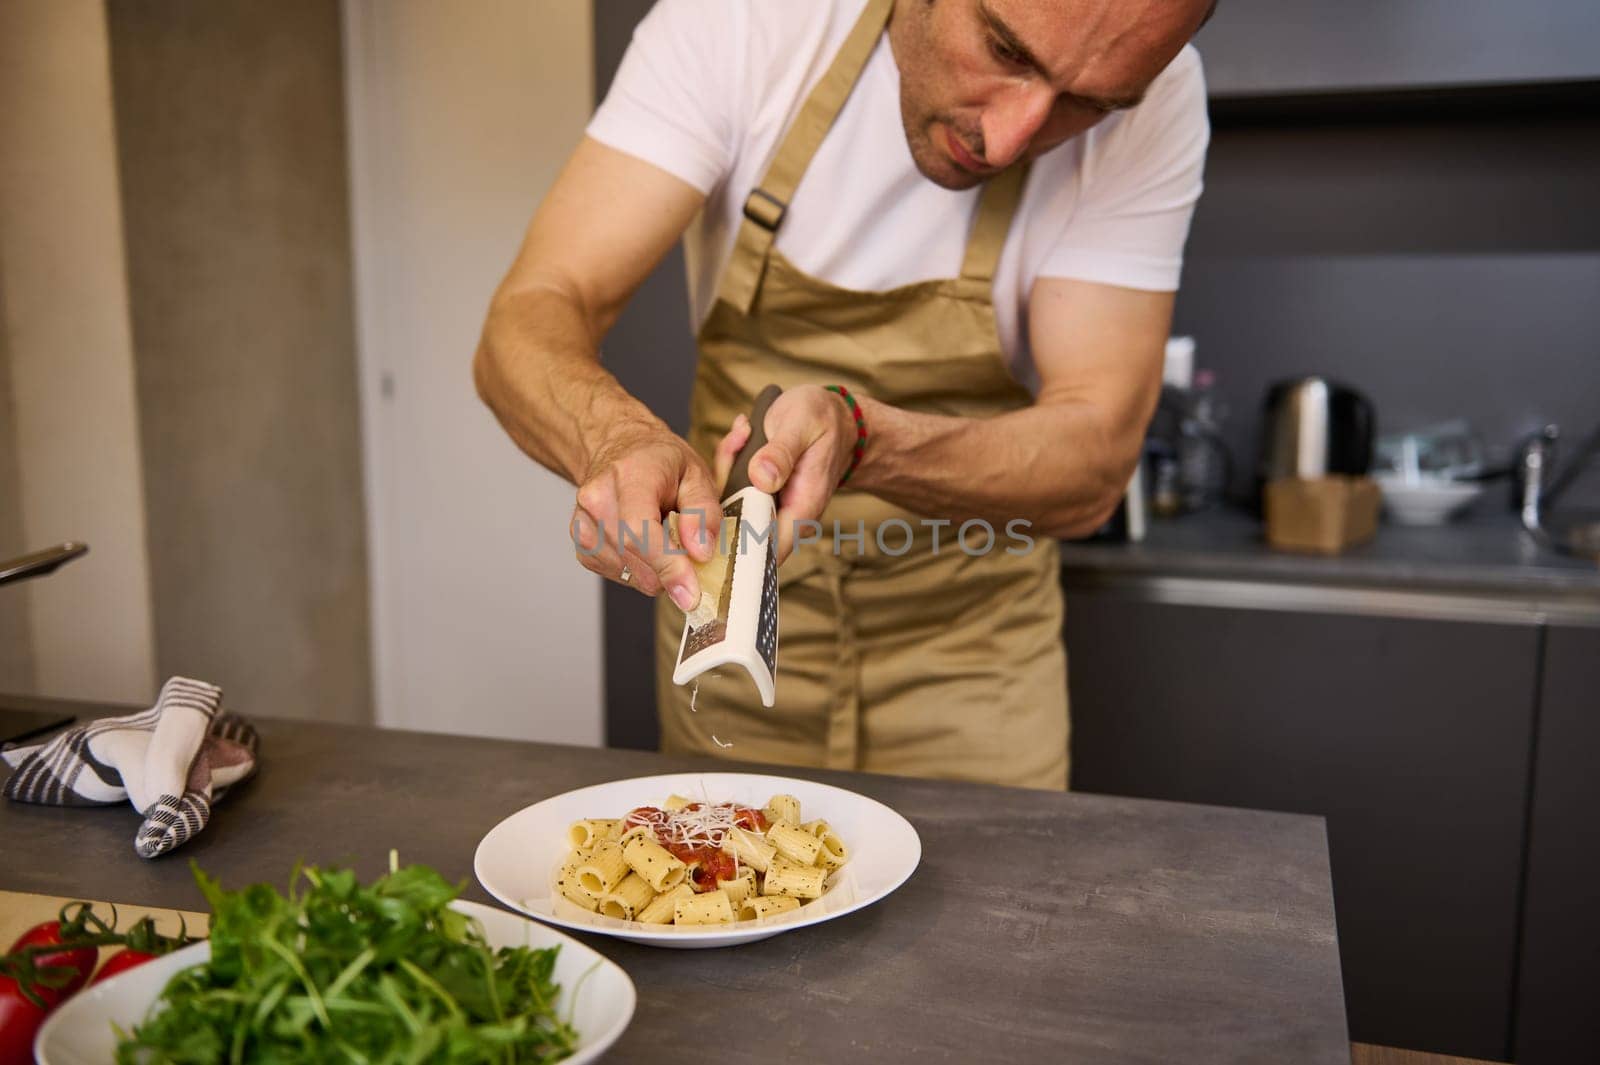 Close-up chef cooking in stylish modern minimalist home kitchen interior, grating parmesan cheese over a plate with freshly boiled pasta with tomato sauce. Ingredients on the kitchen countertop by artgf